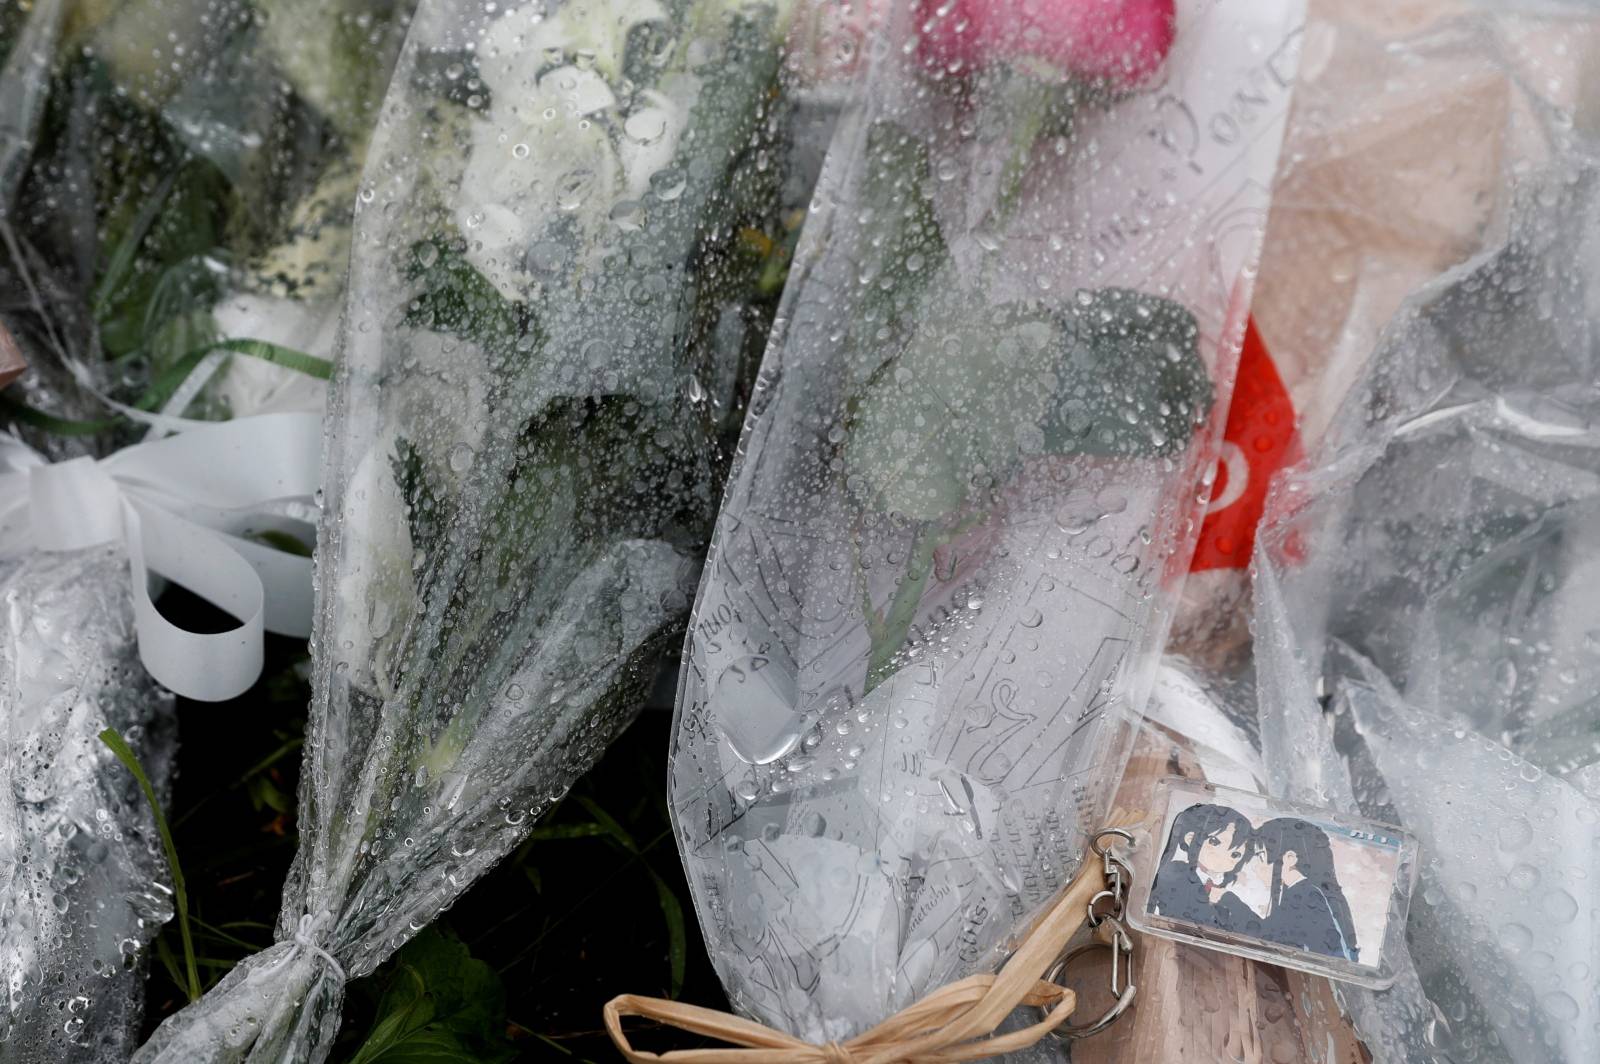 Flowers dedicated to the victims of the fire are seen left outside the Kyoto Animation building which was torched by arson attack, in Kyoto